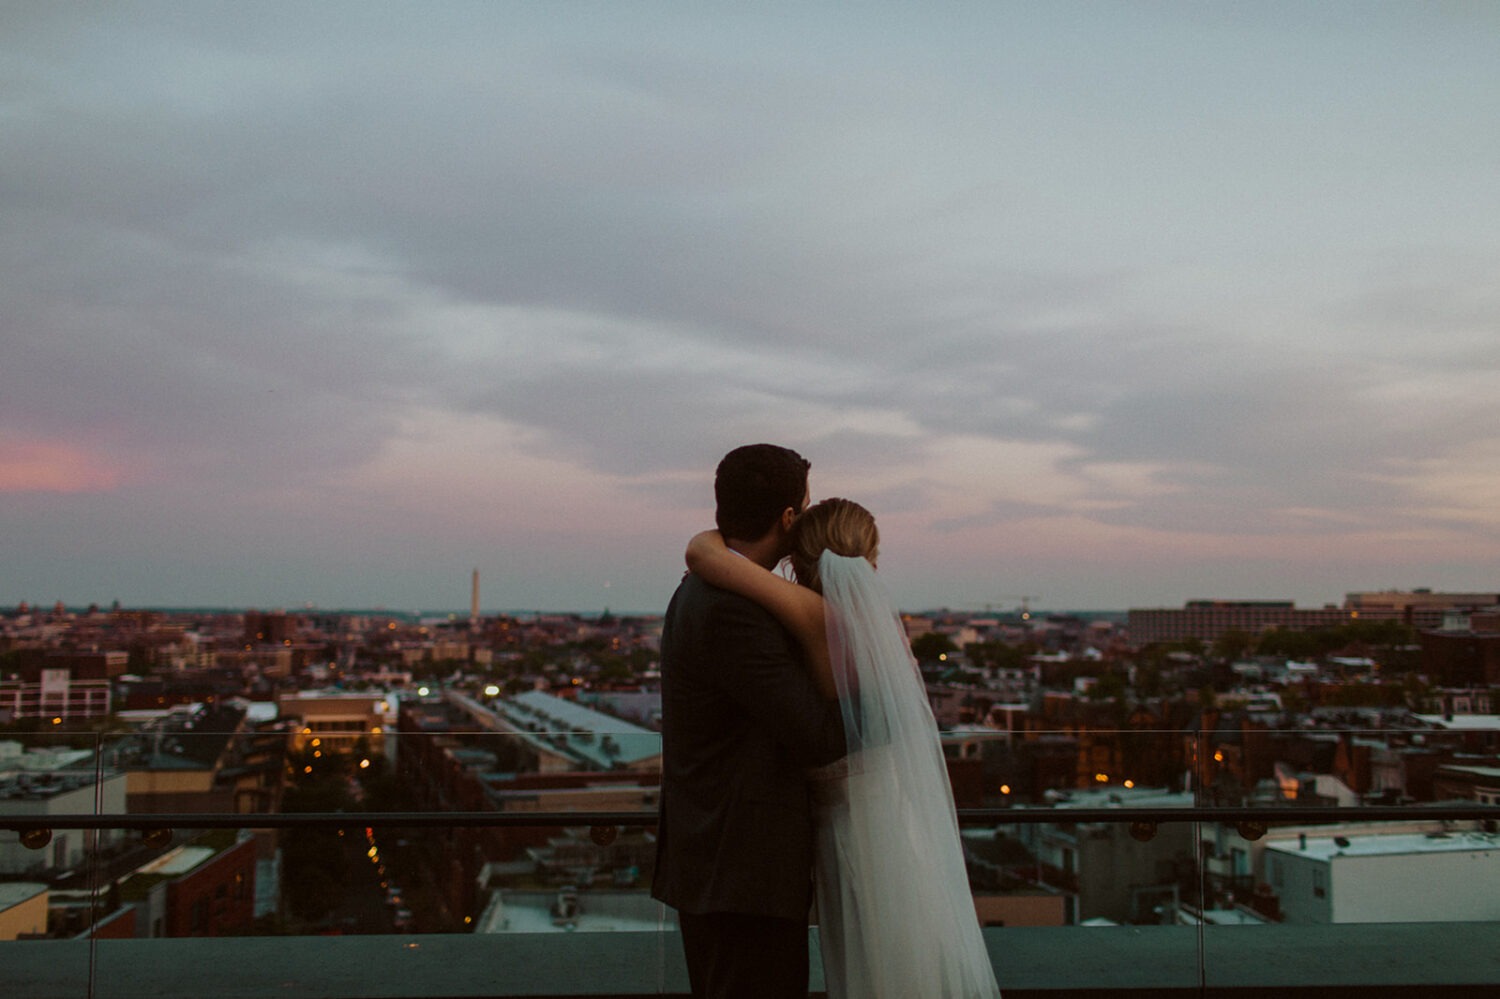 couple embraces at sunset on DC rooftop wedding venue 